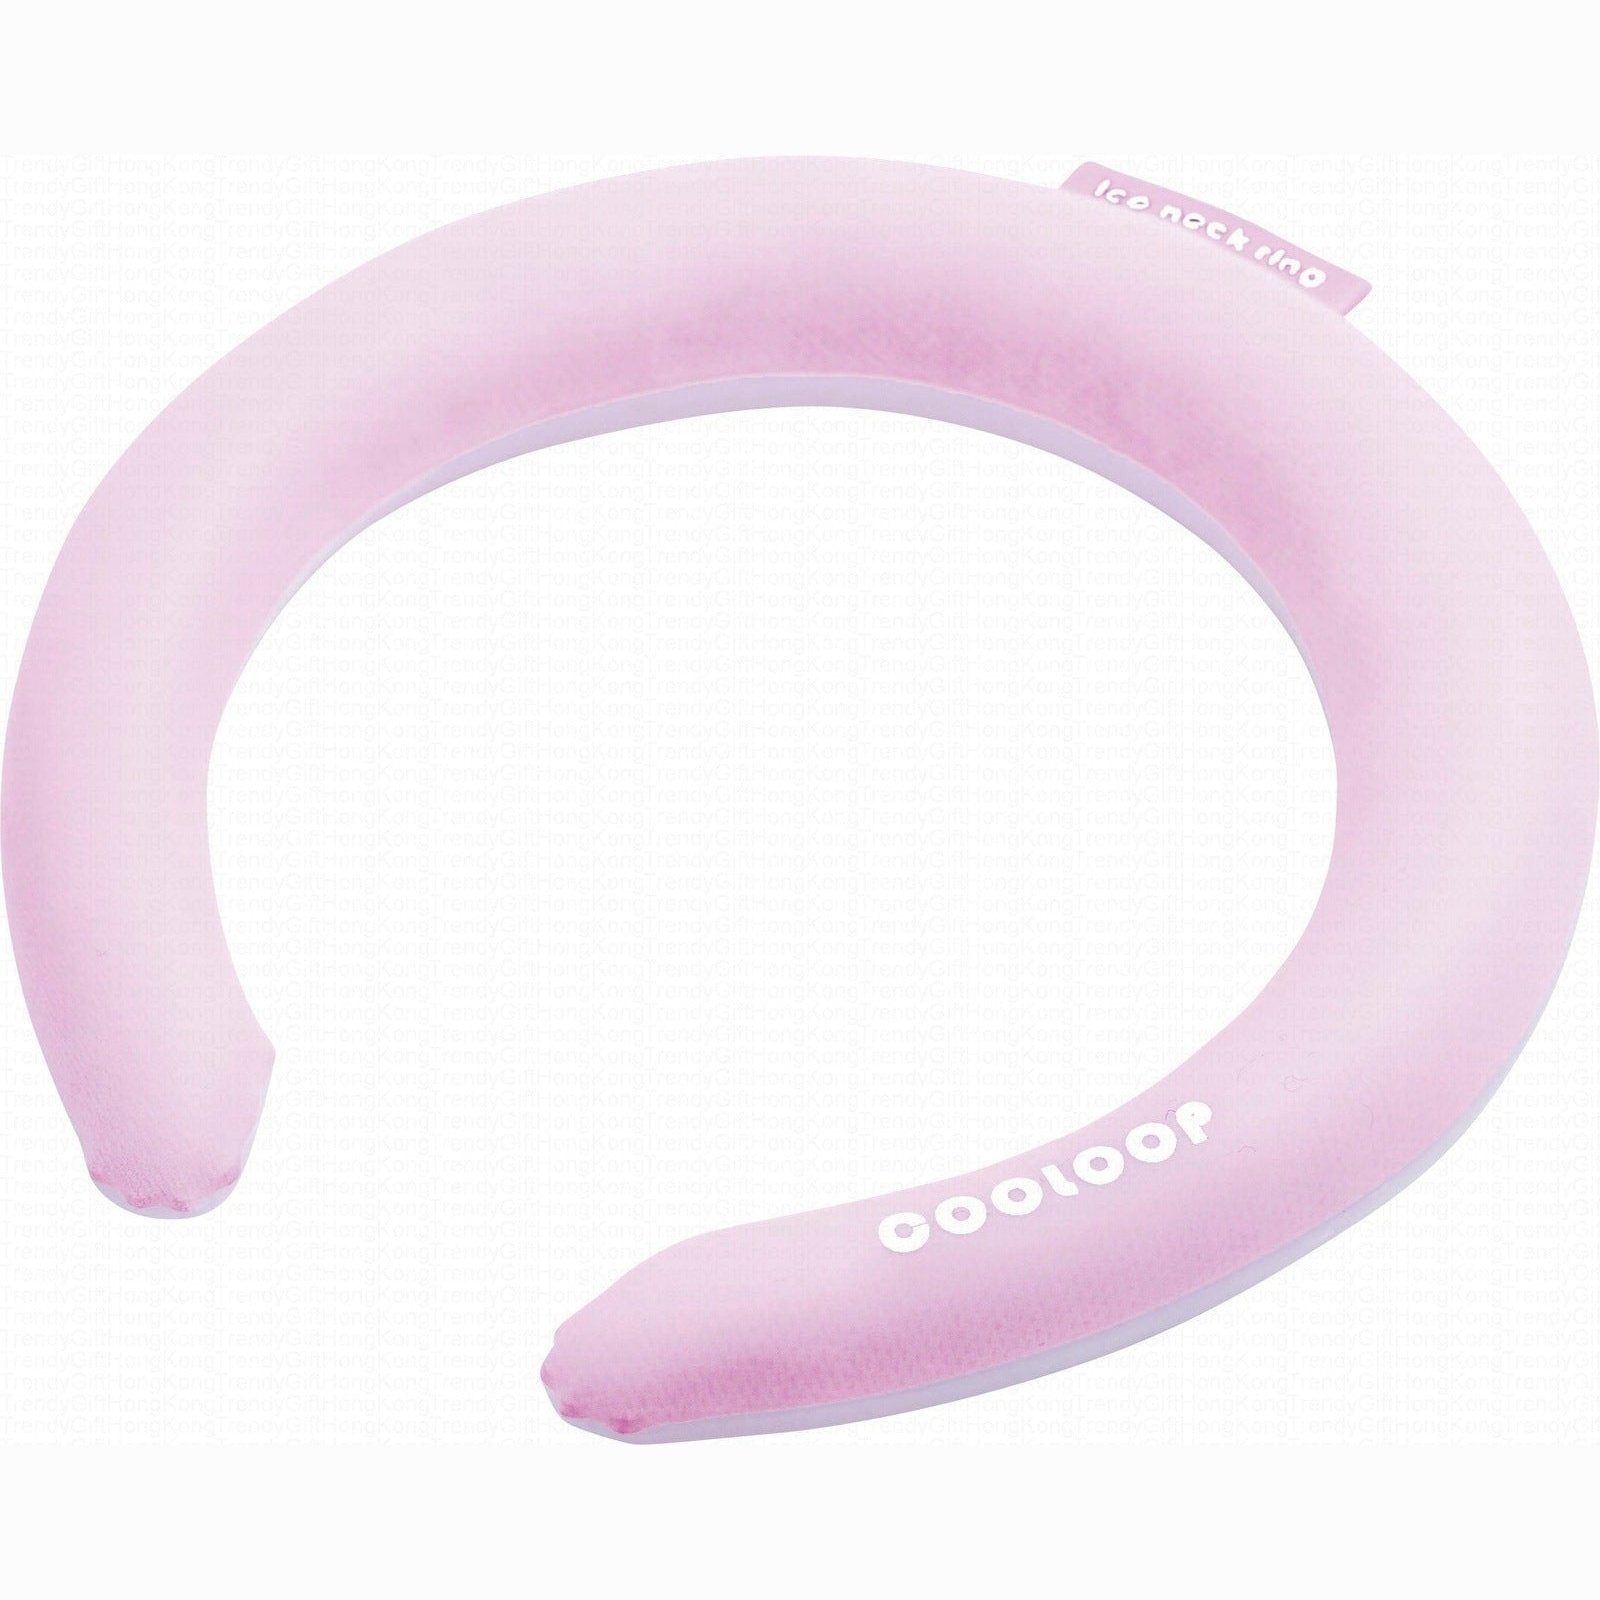 Cogit COOLOOP Ice Condensing Neck Ring - Instant Cooling - Beige/Pink/Blue/Clear trendygifthk